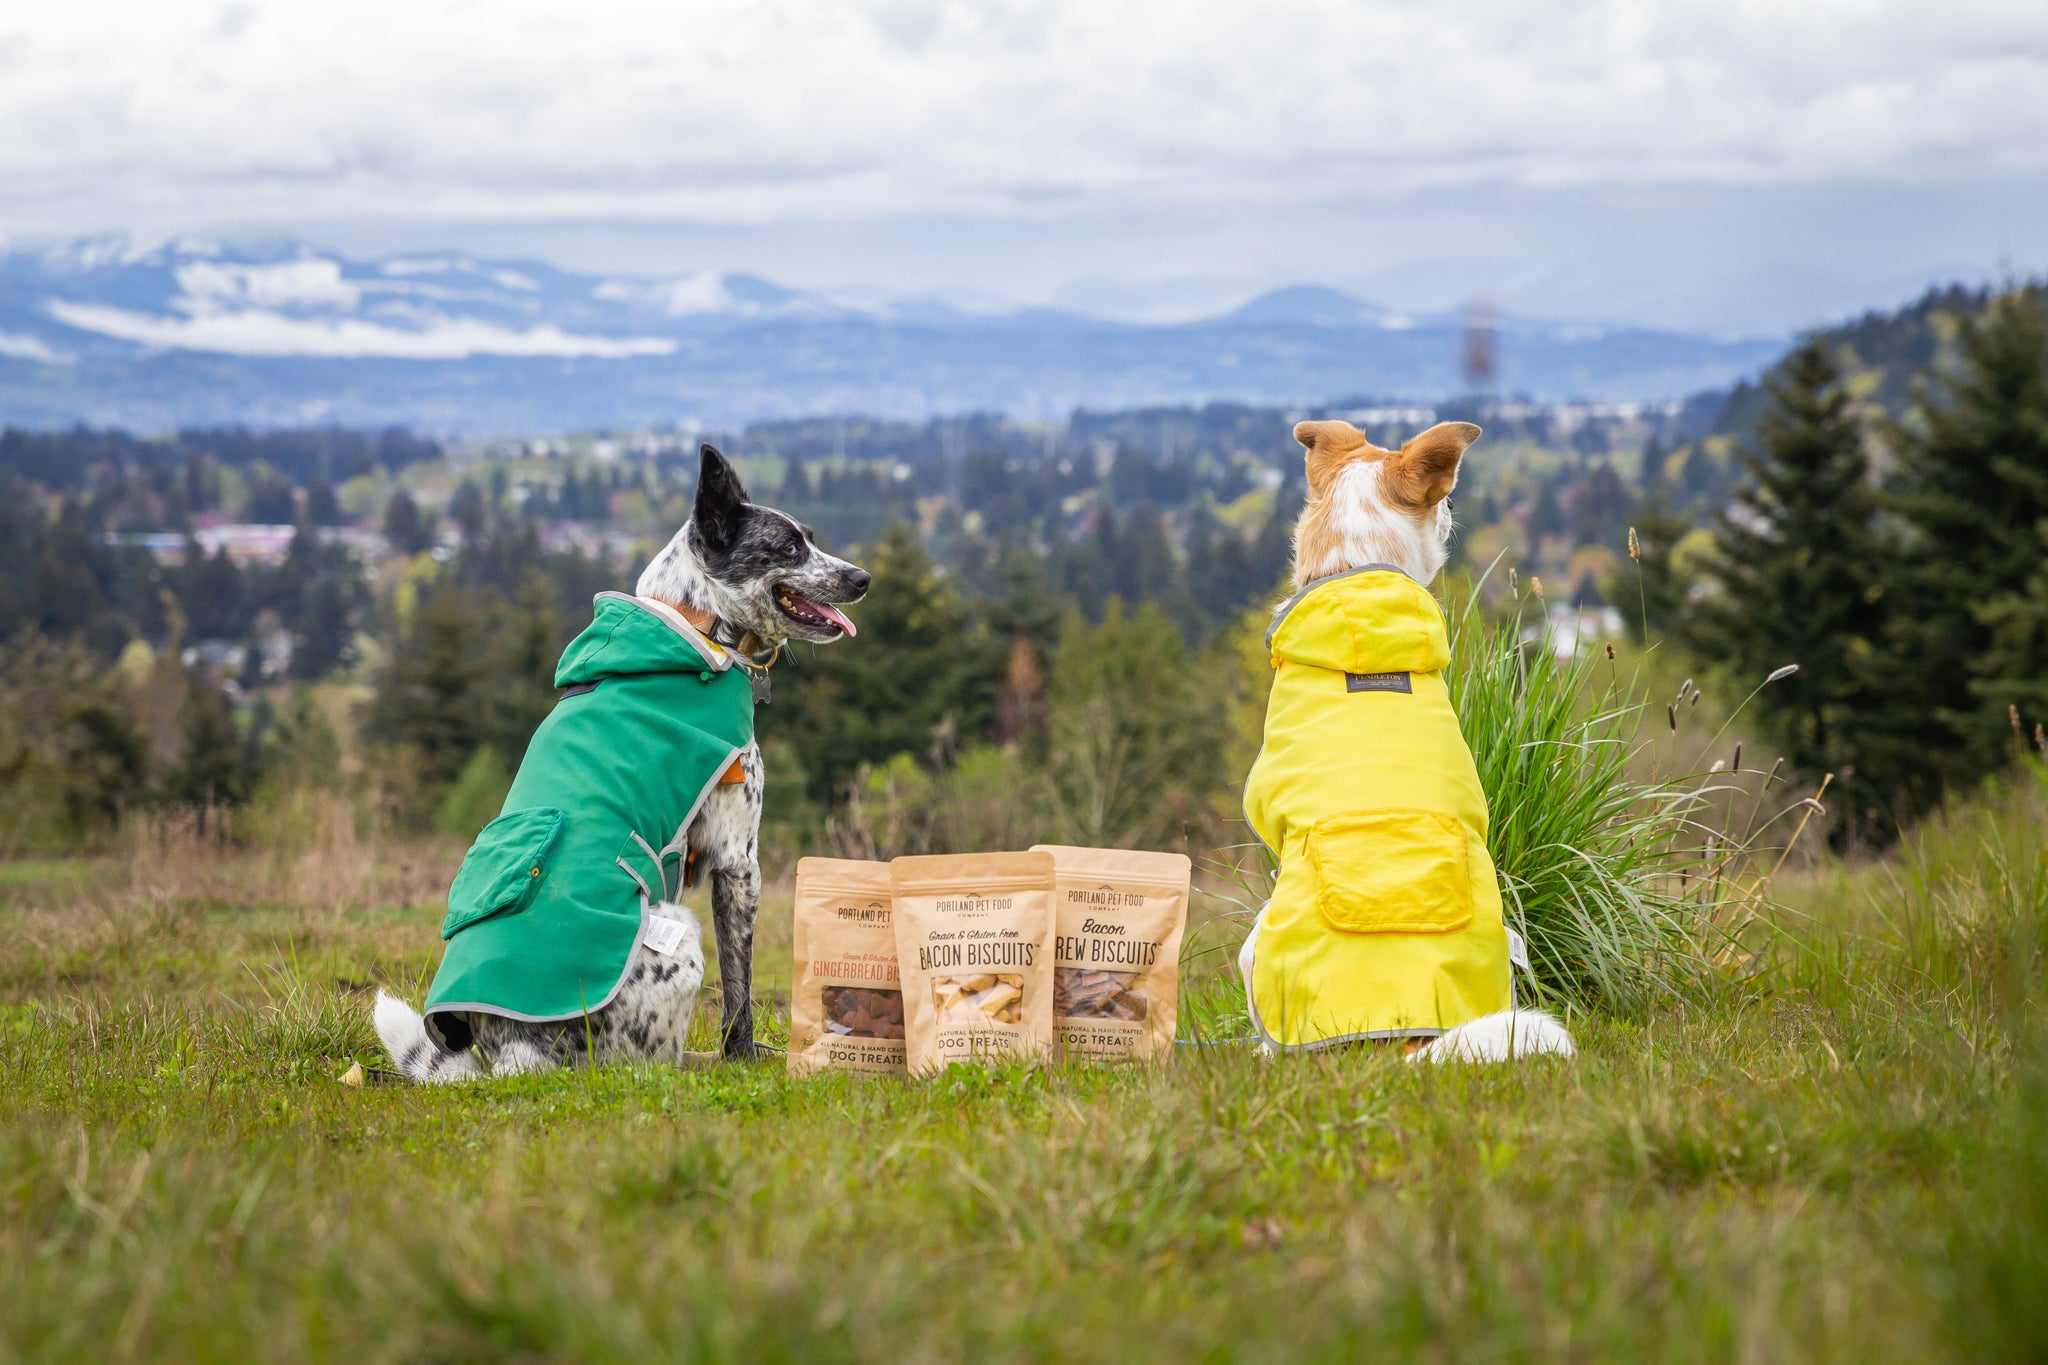 Two dogs smiling and sitting next to Portland Pet Food Biscuits